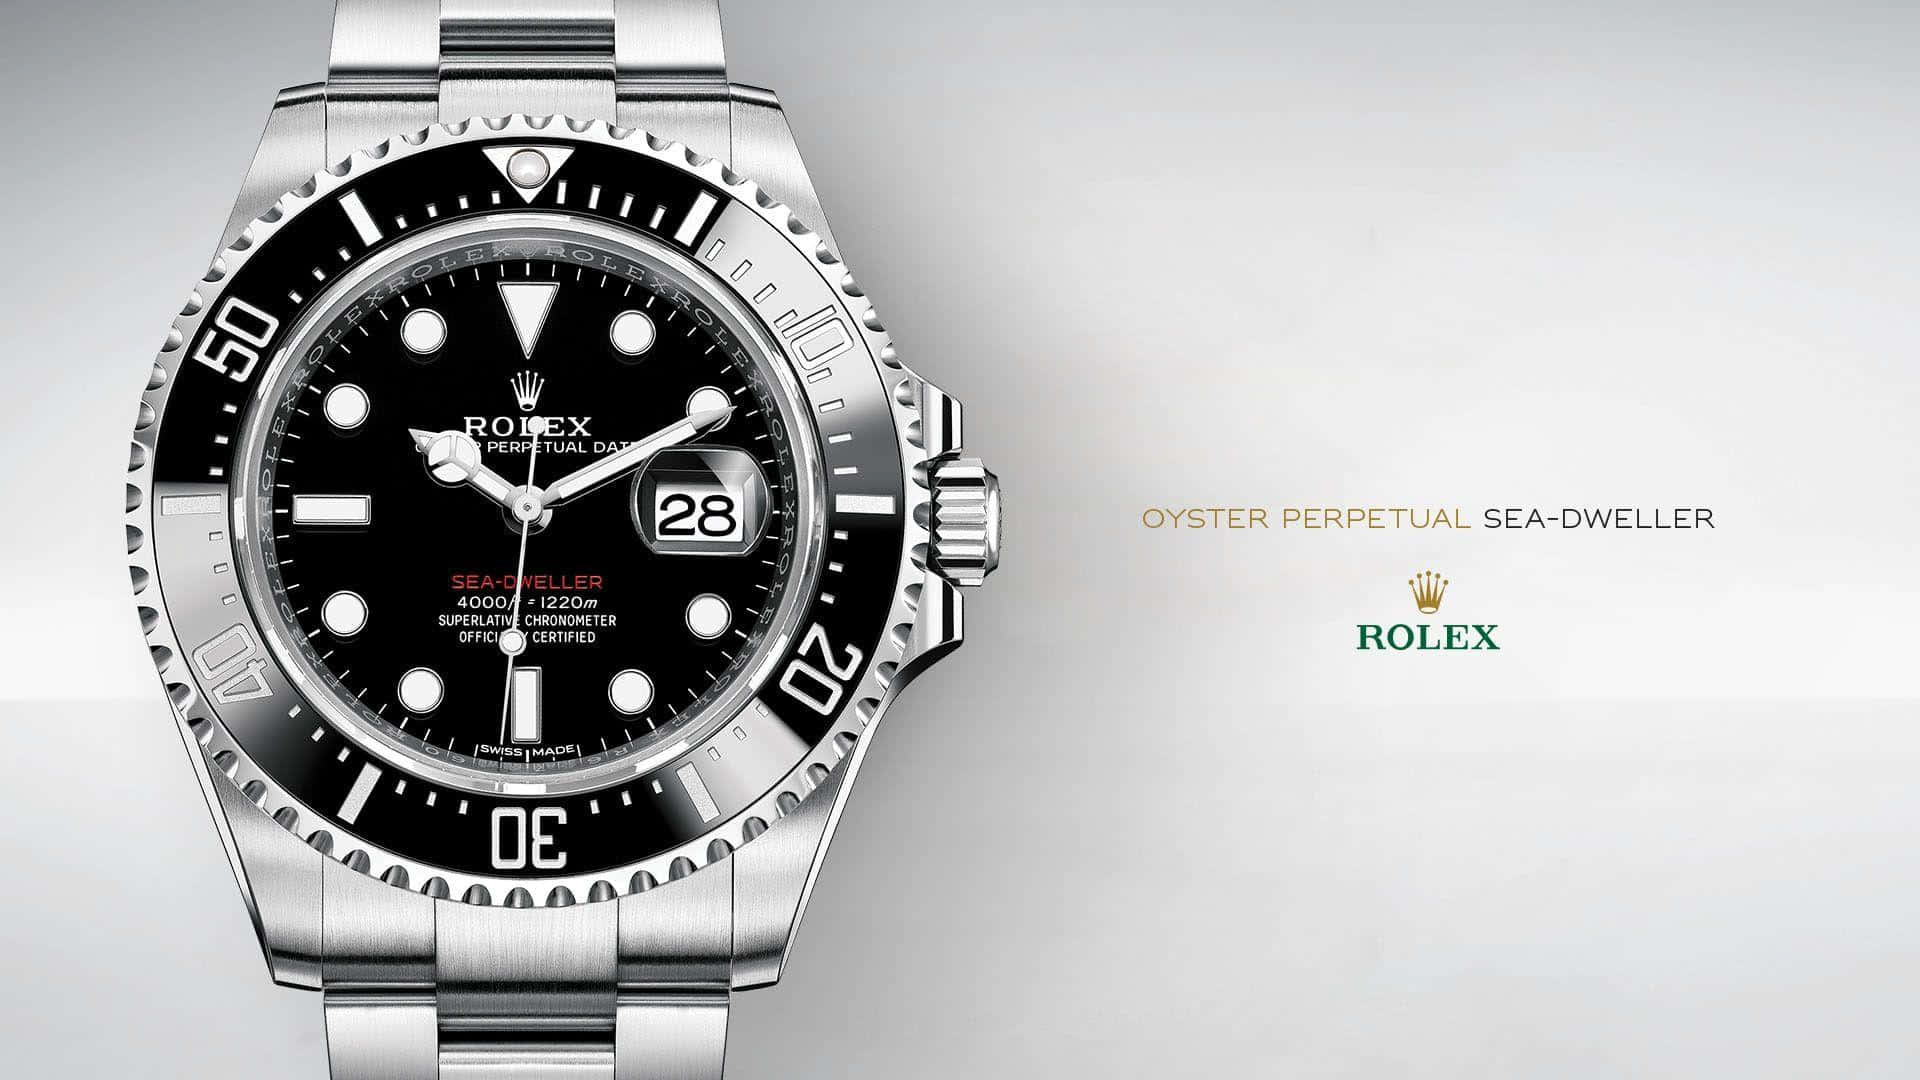 Timeless Perfection - A Classic Rolex Wristwatch